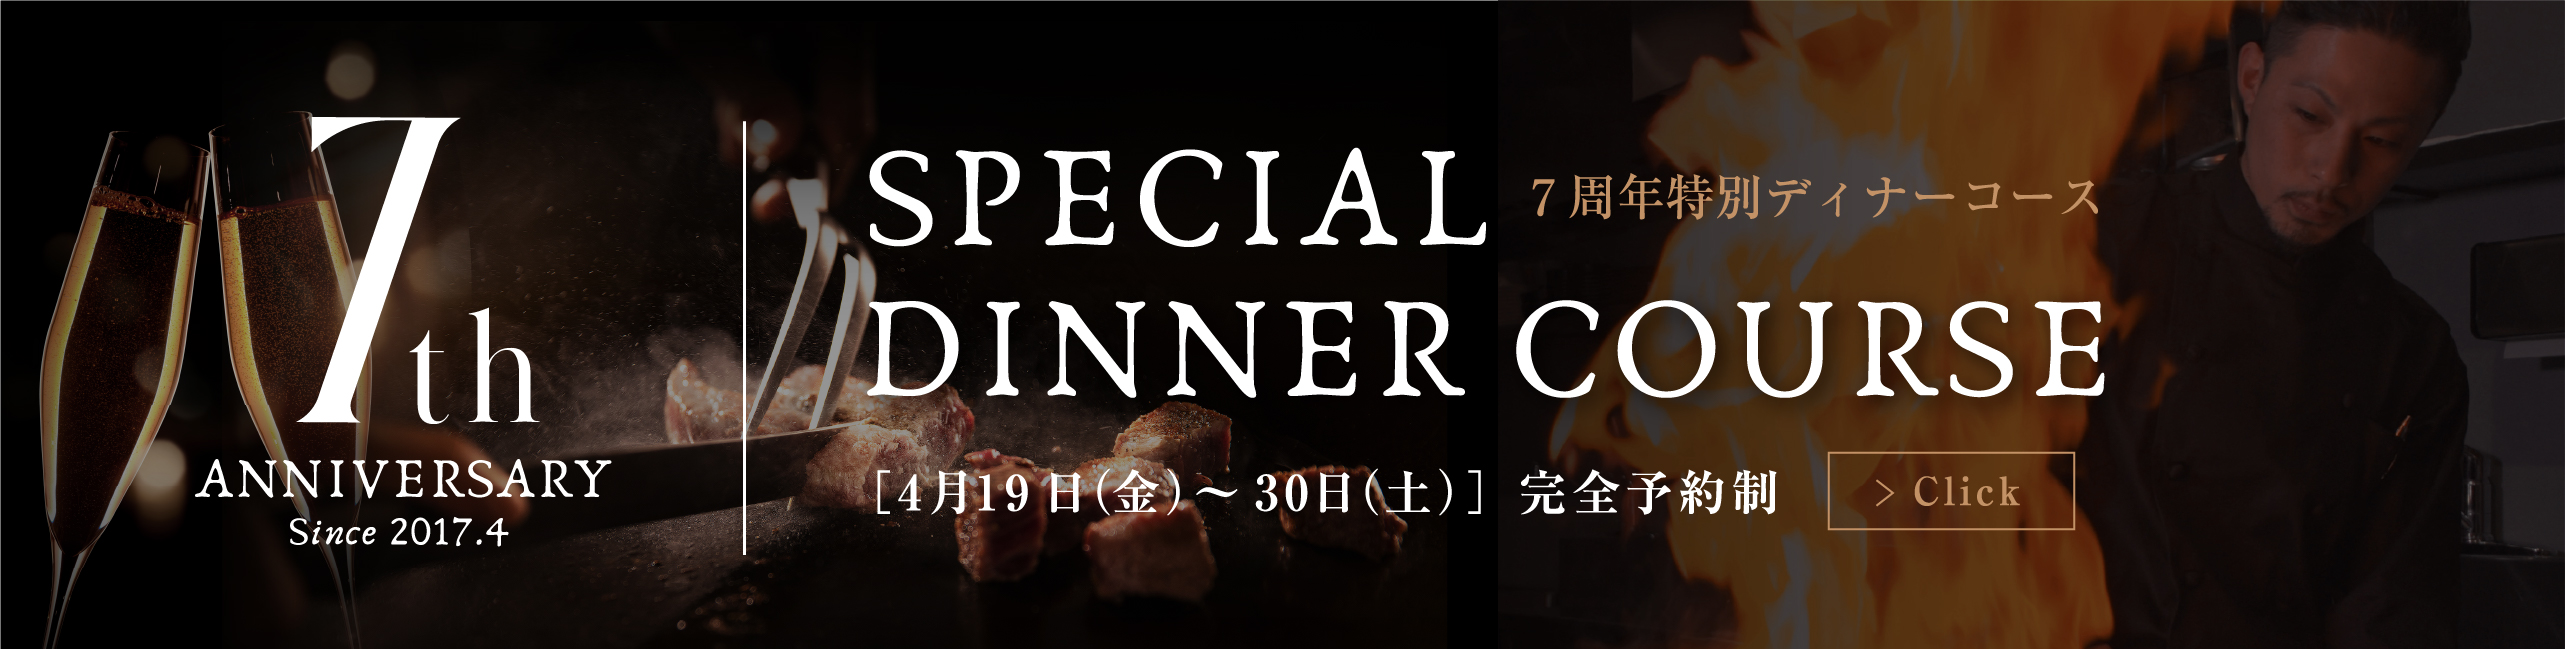 7th anniversary Dinner Course